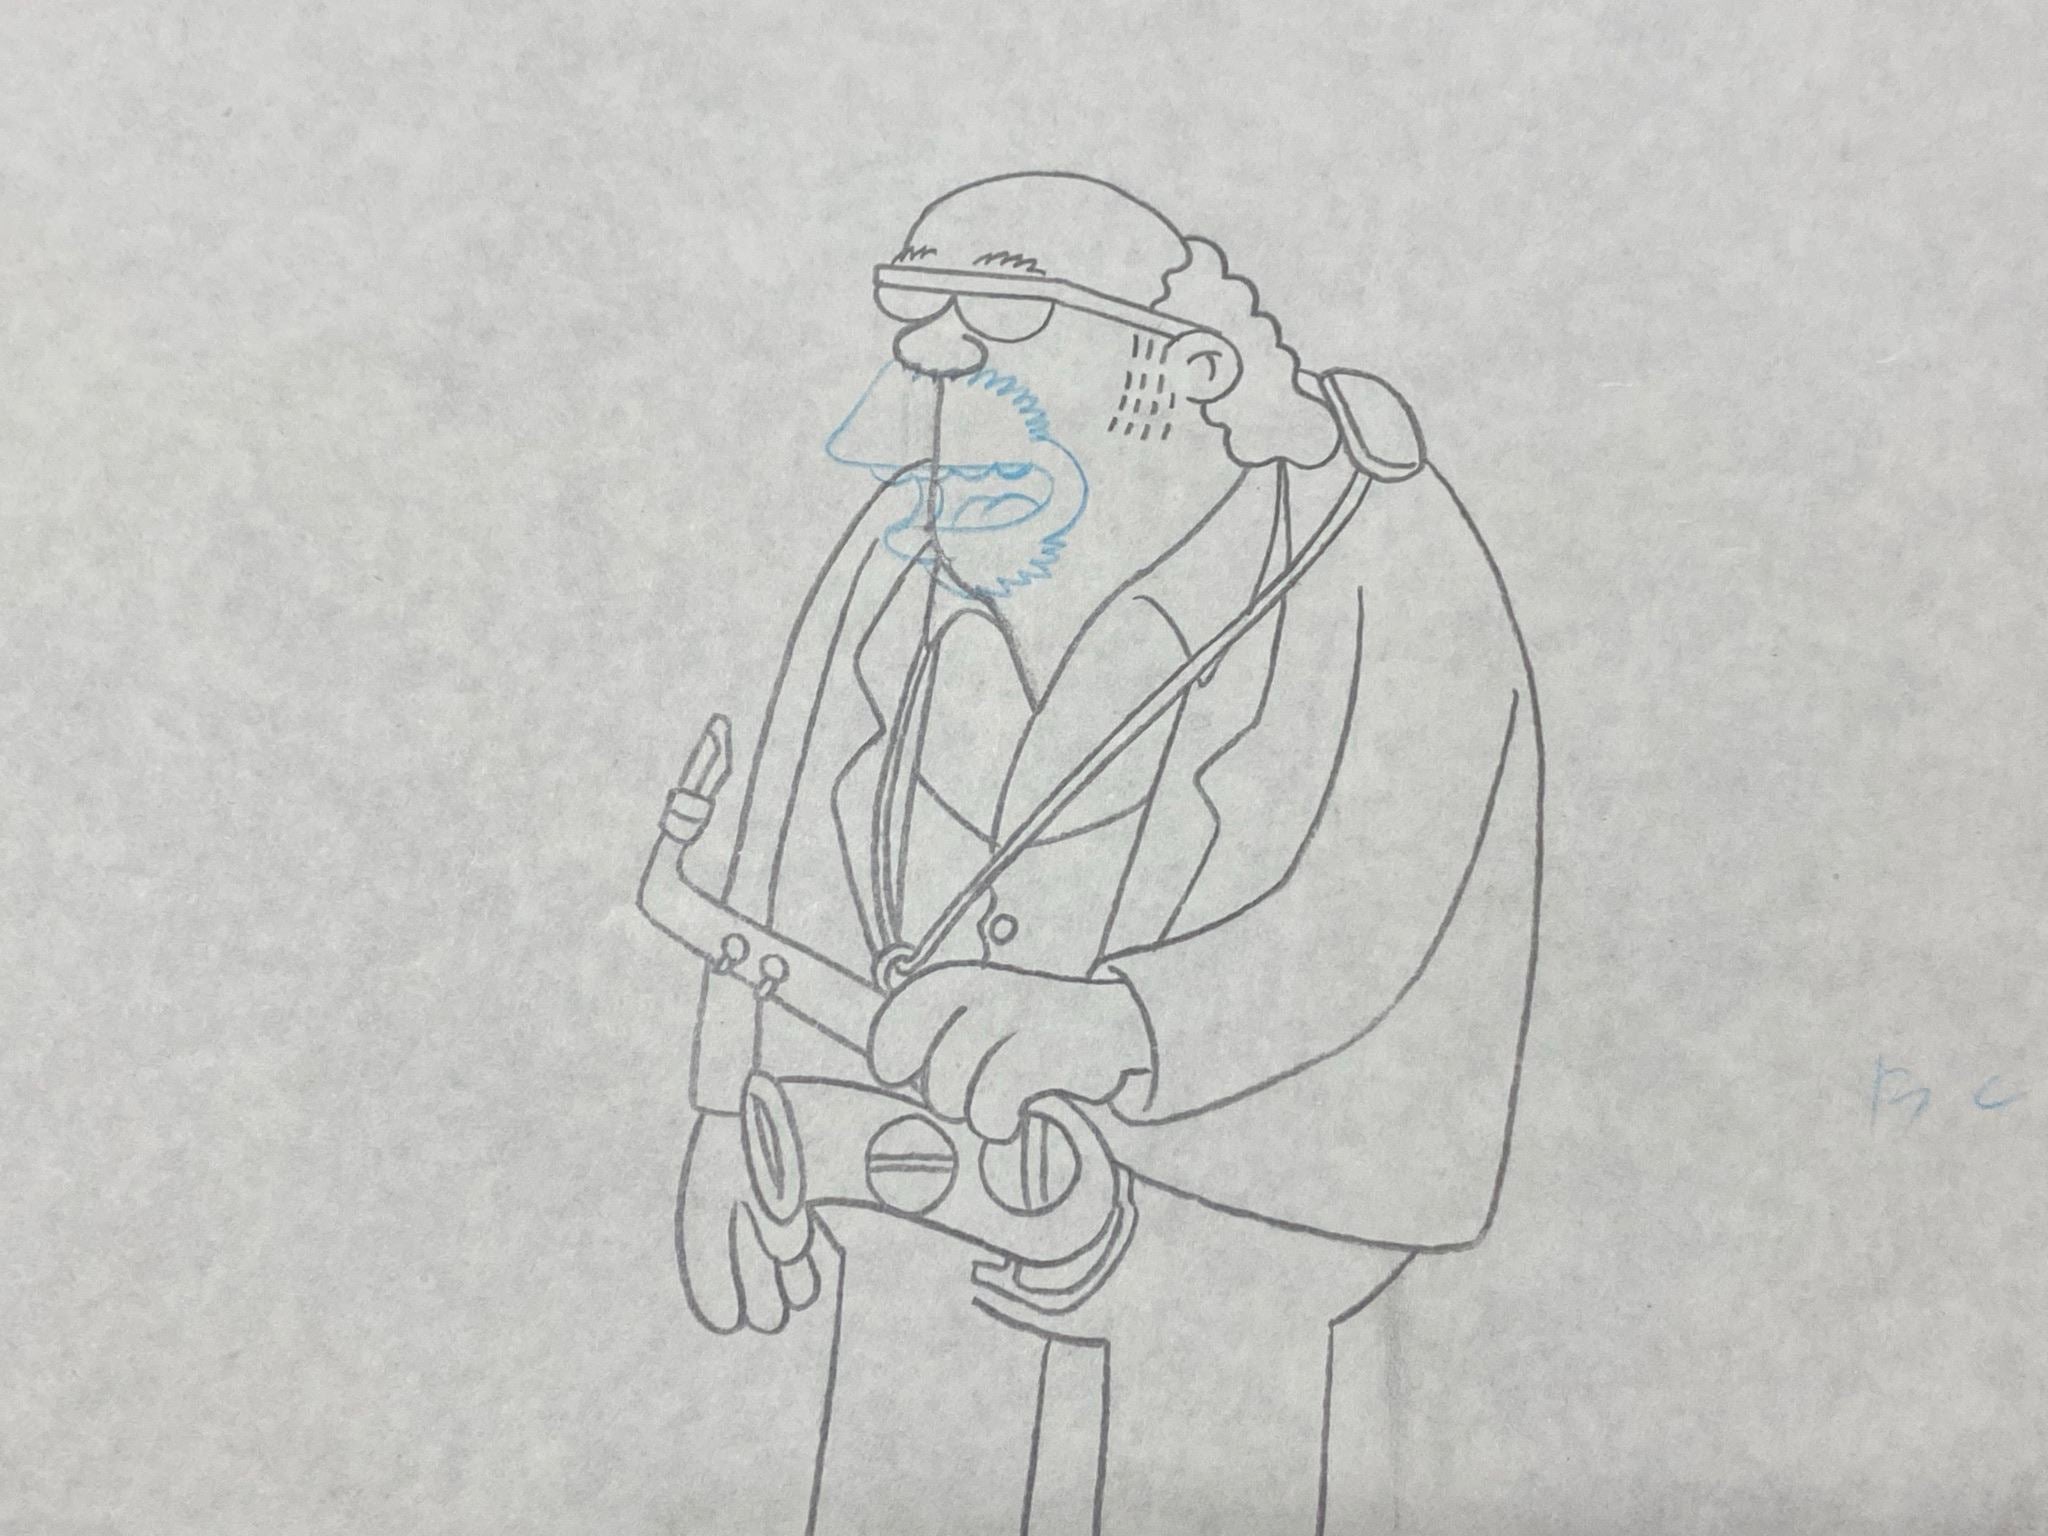 The Simpsons - Original drawing of Bleeding Gums Murphy – Gallery Animation